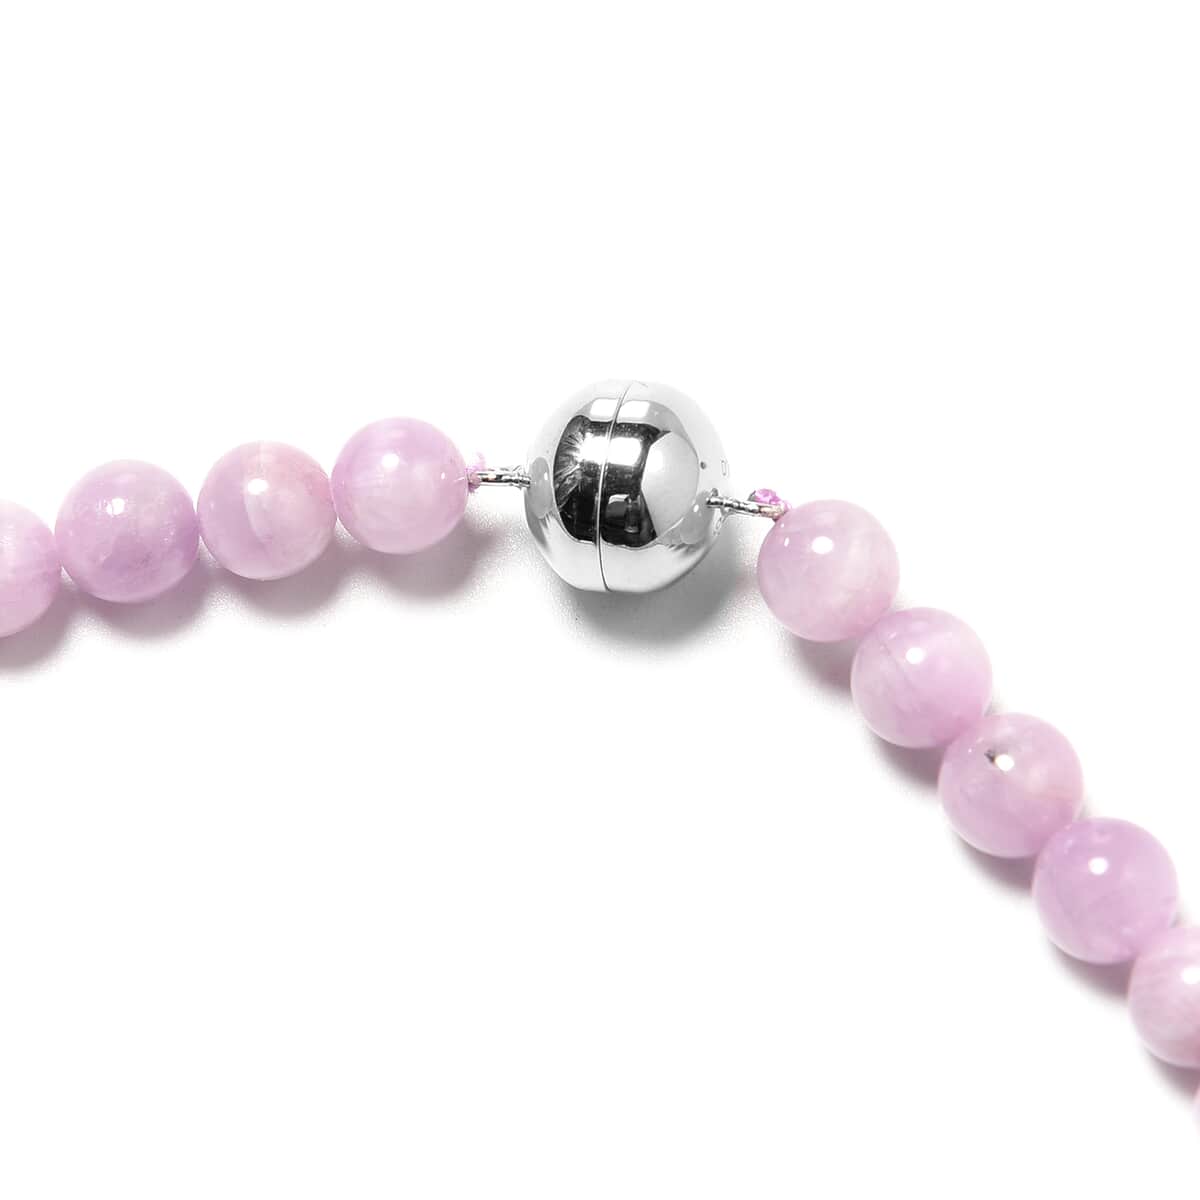 Martha Rocha Kunzite Bead Necklace in Sterling Silver, Silver Magnetic Clasp, Kunzite Necklace, Beaded Necklace 396.50 ctw 7-16mm (20 Inches) image number 2